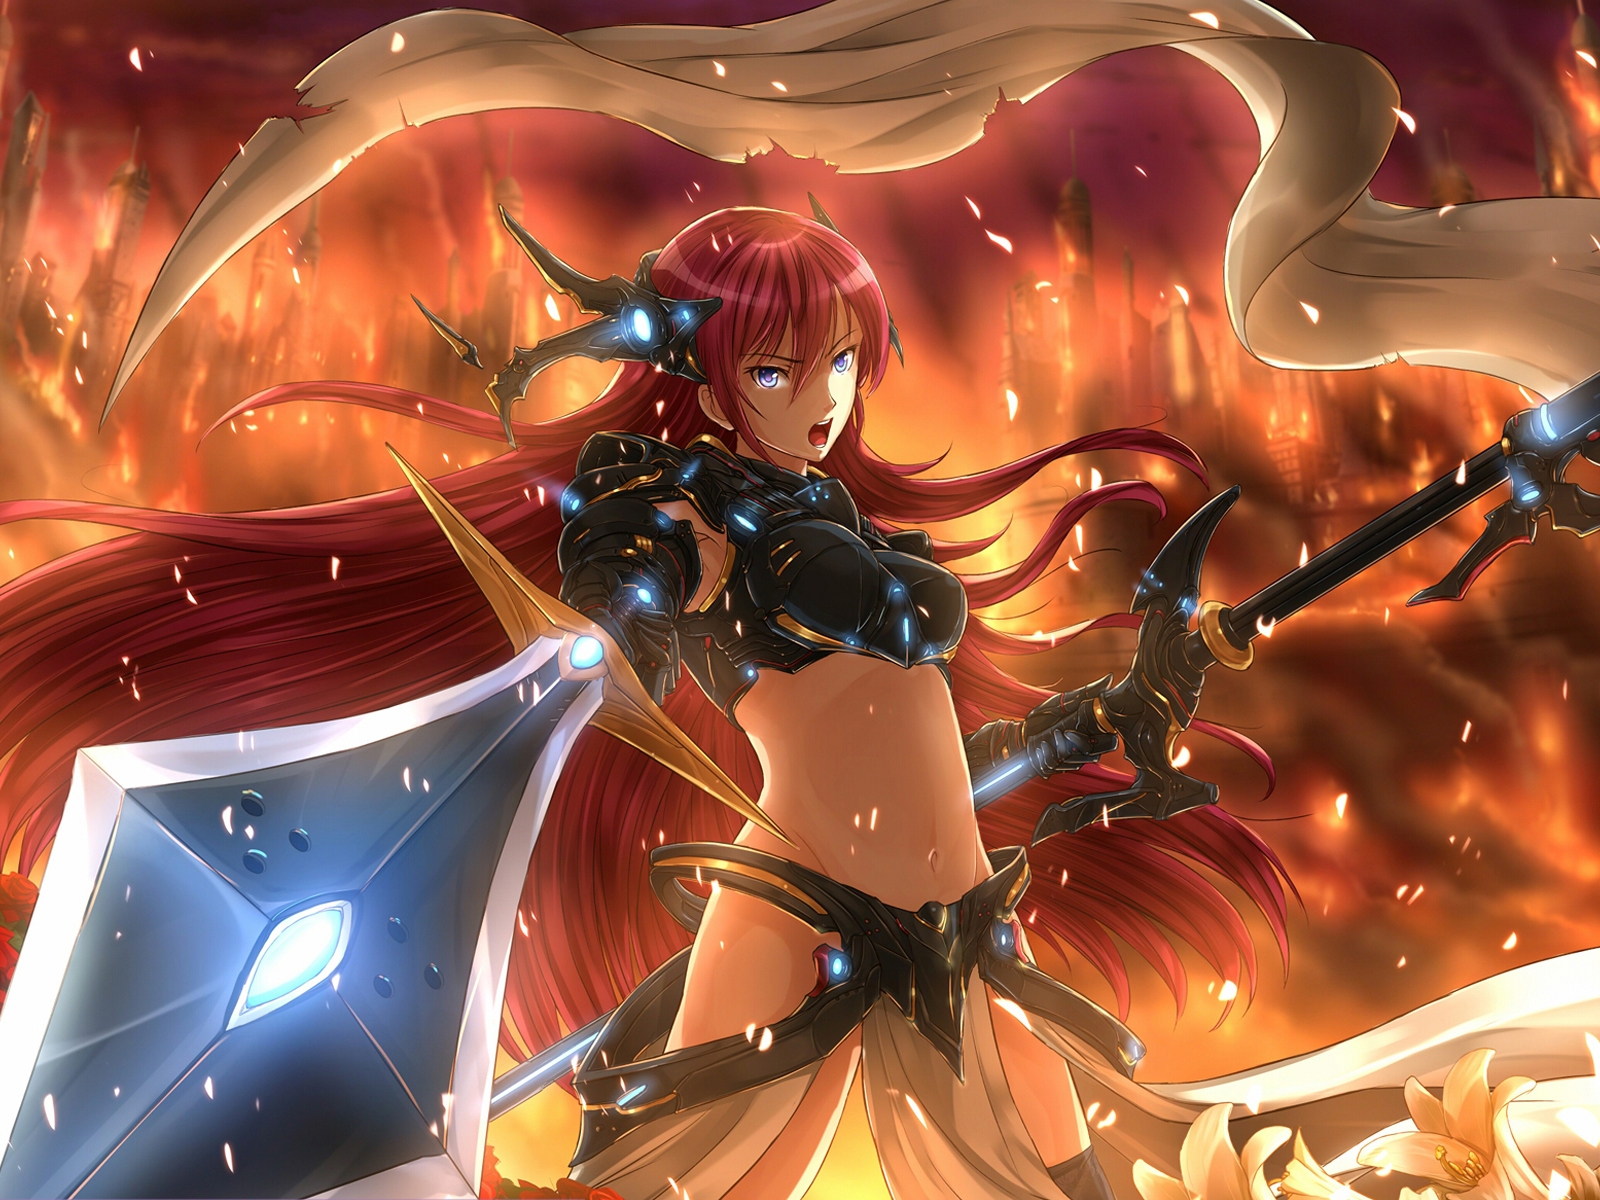 Megurine Luka in Fire for 1600 x 1200 resolution